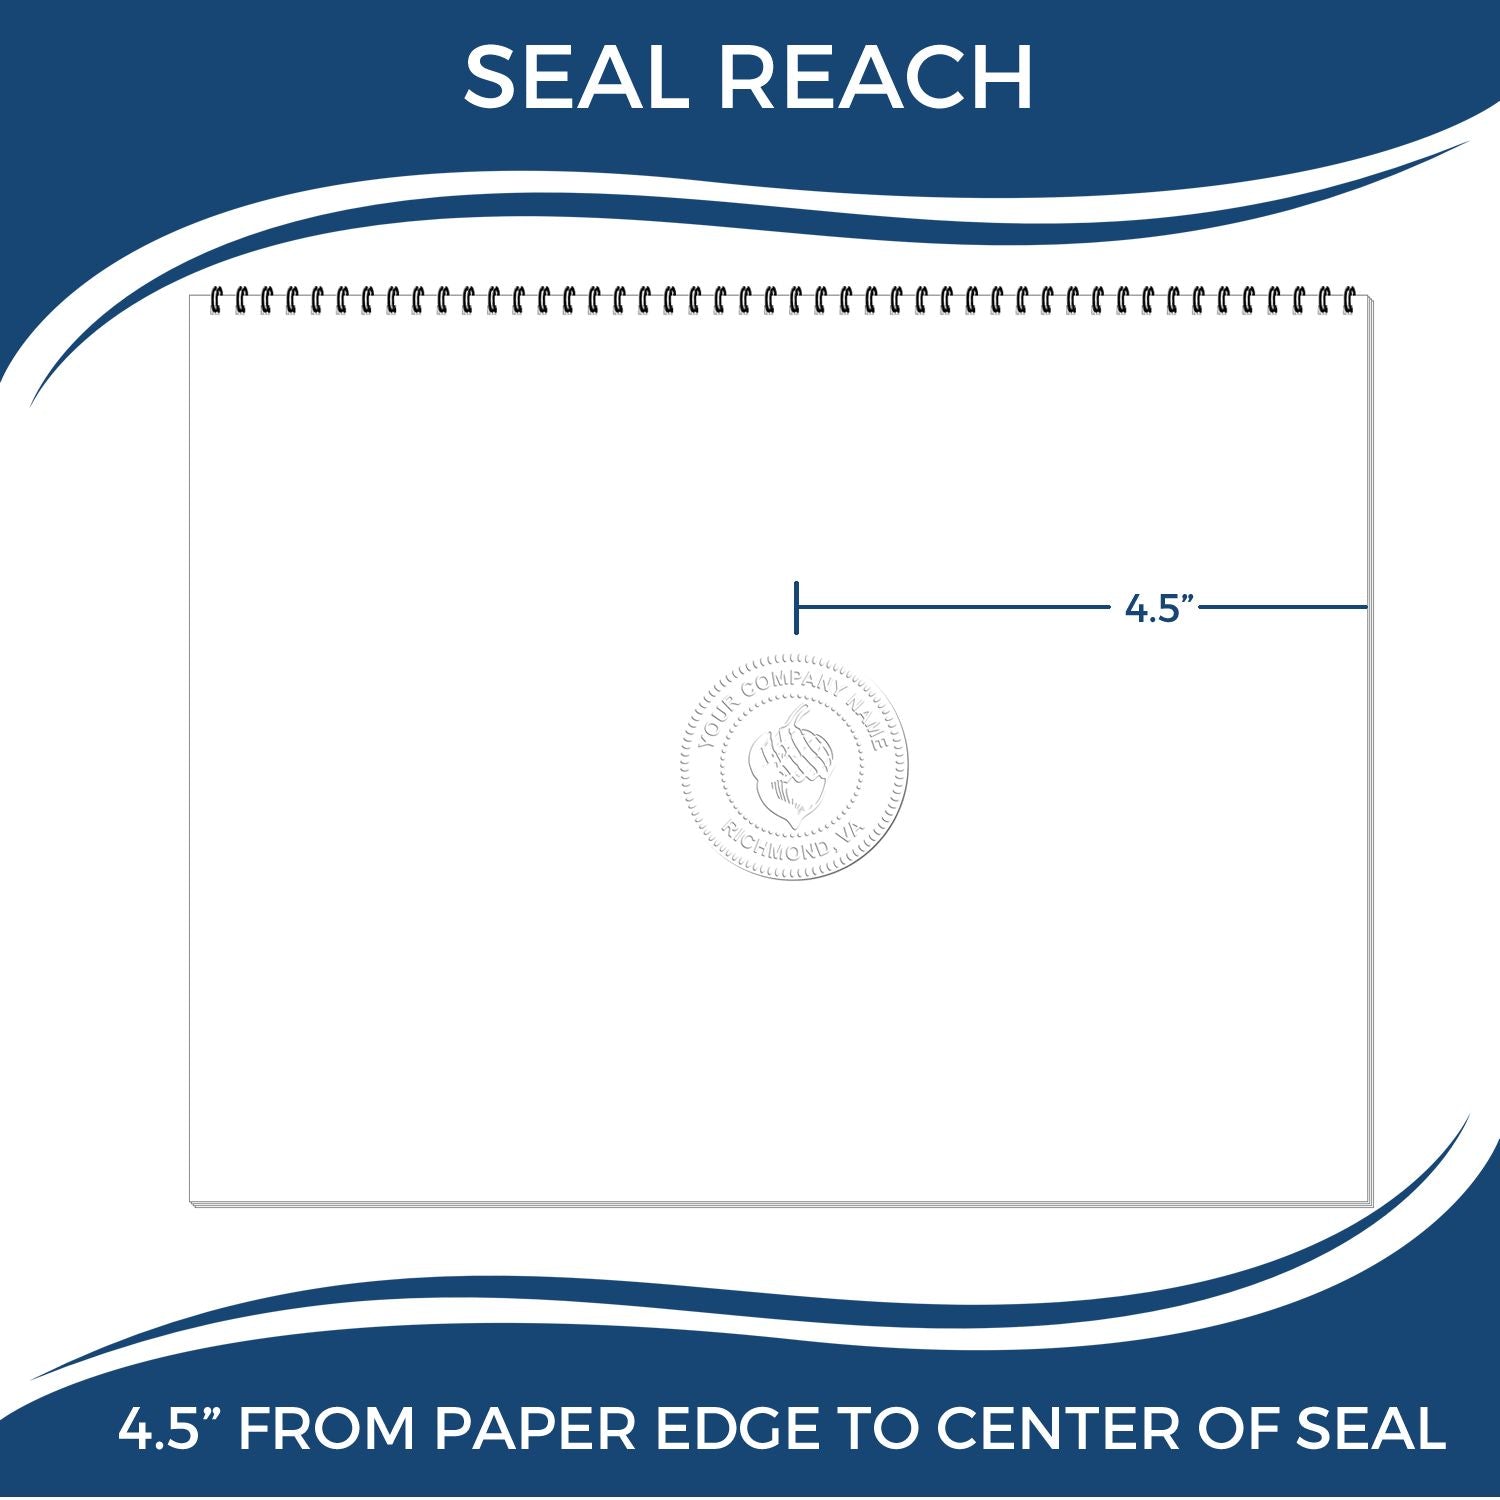 An infographic showing the seal reach which is represented by a ruler and a miniature seal image of the State of Pennsylvania Extended Long Reach Engineer Seal